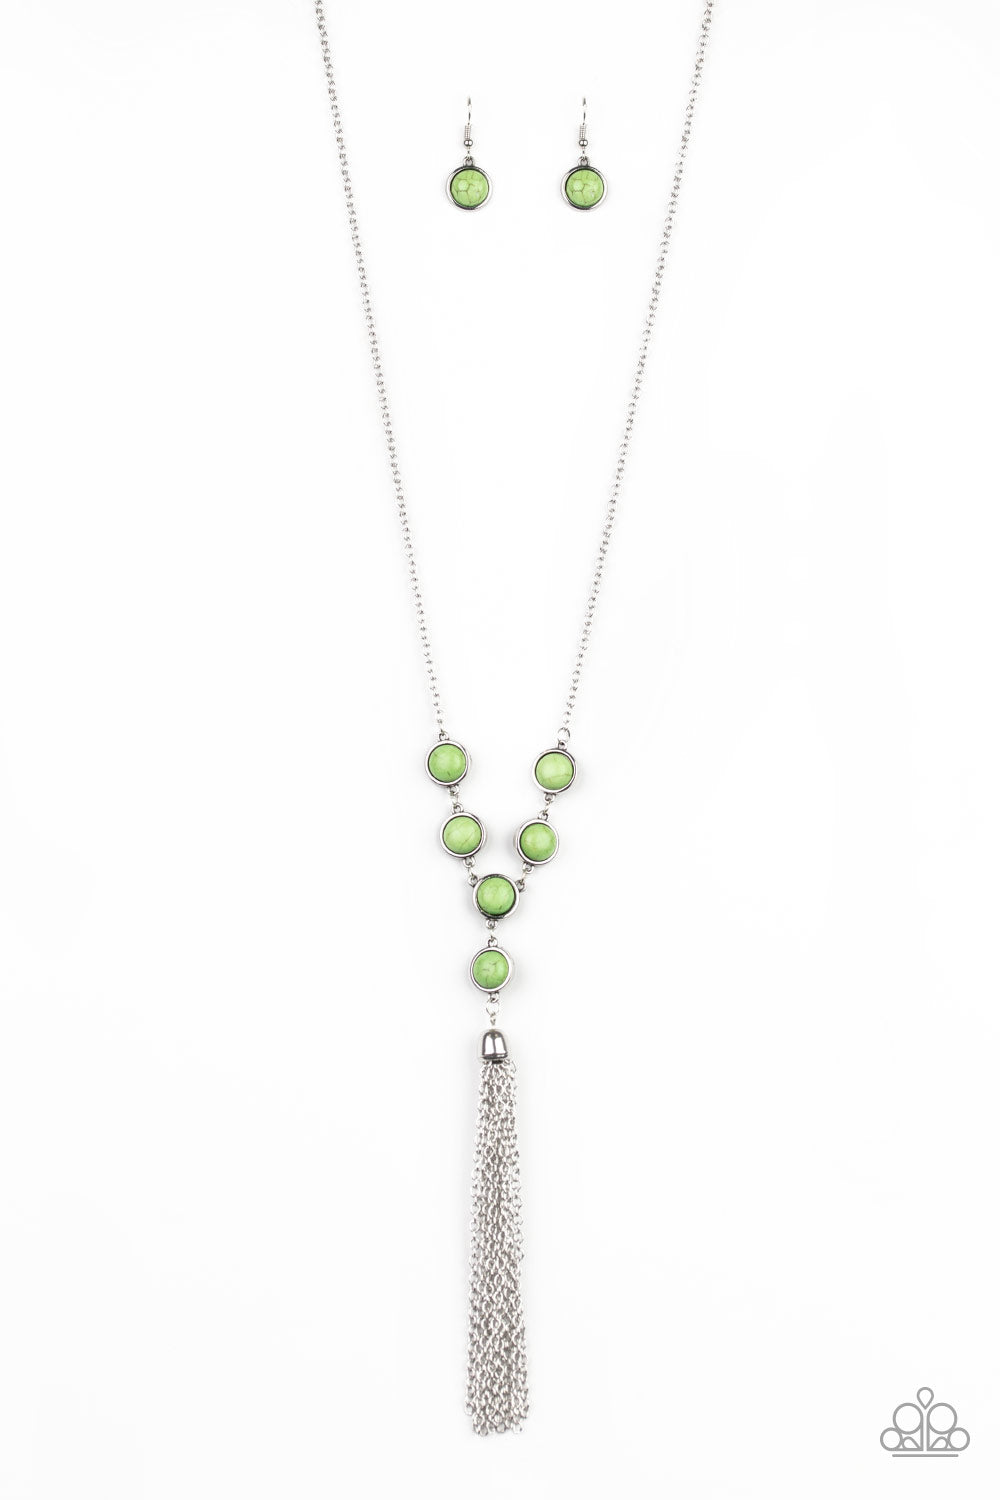 Paparazzi Accessories - Rural Heiress - Green Necklace